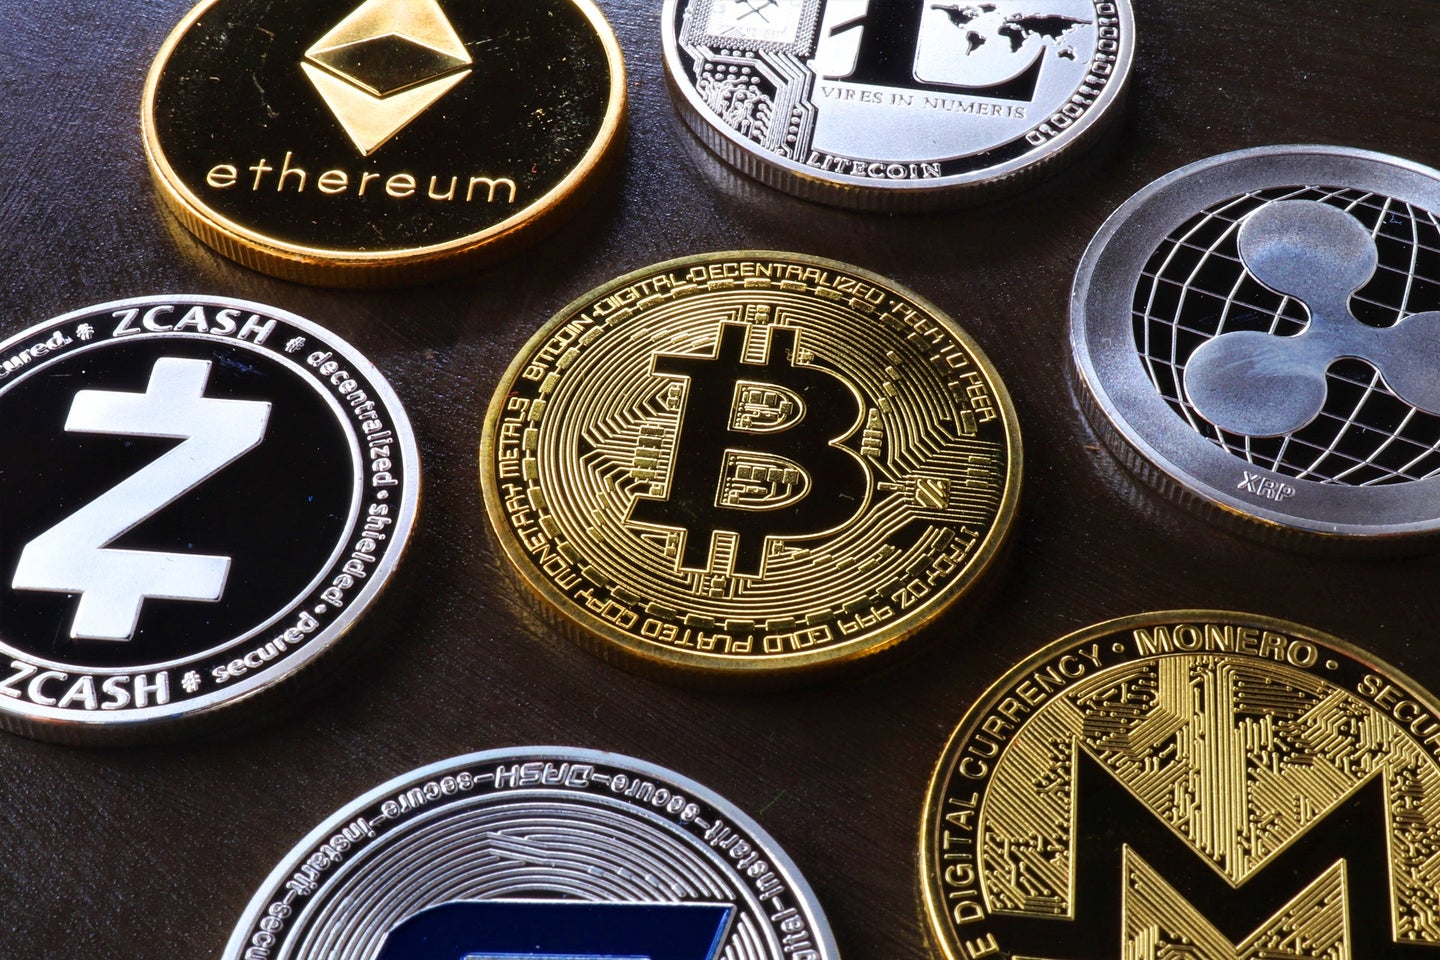 Physical depictions of digital cryptocurrency "coins" like Bitcoin, Ethereum, Zcash, and others.